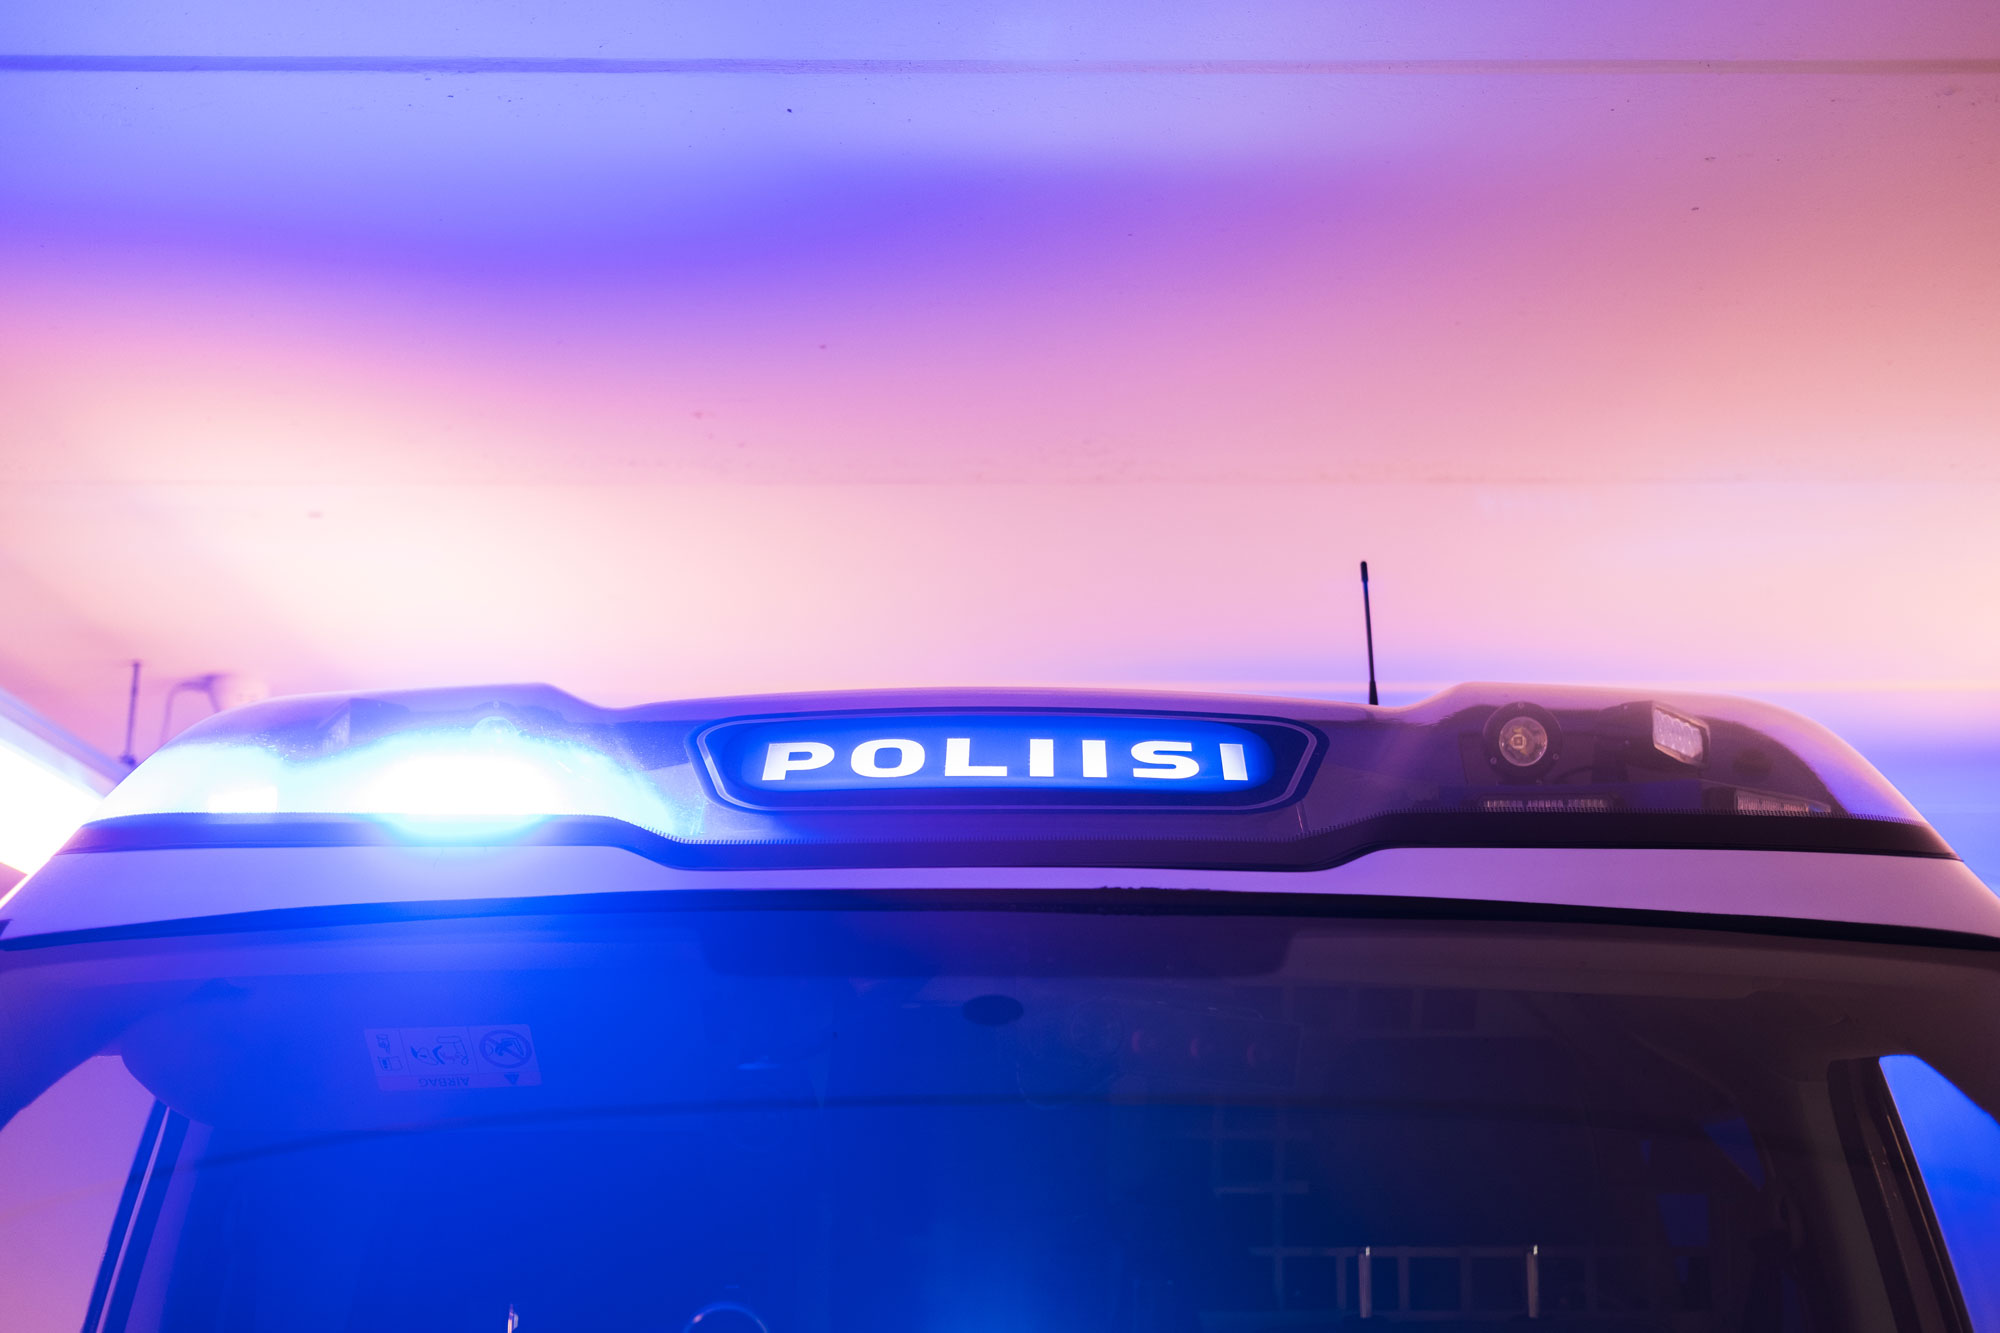 The light bar of a police car with the blue light pictured against the sky.